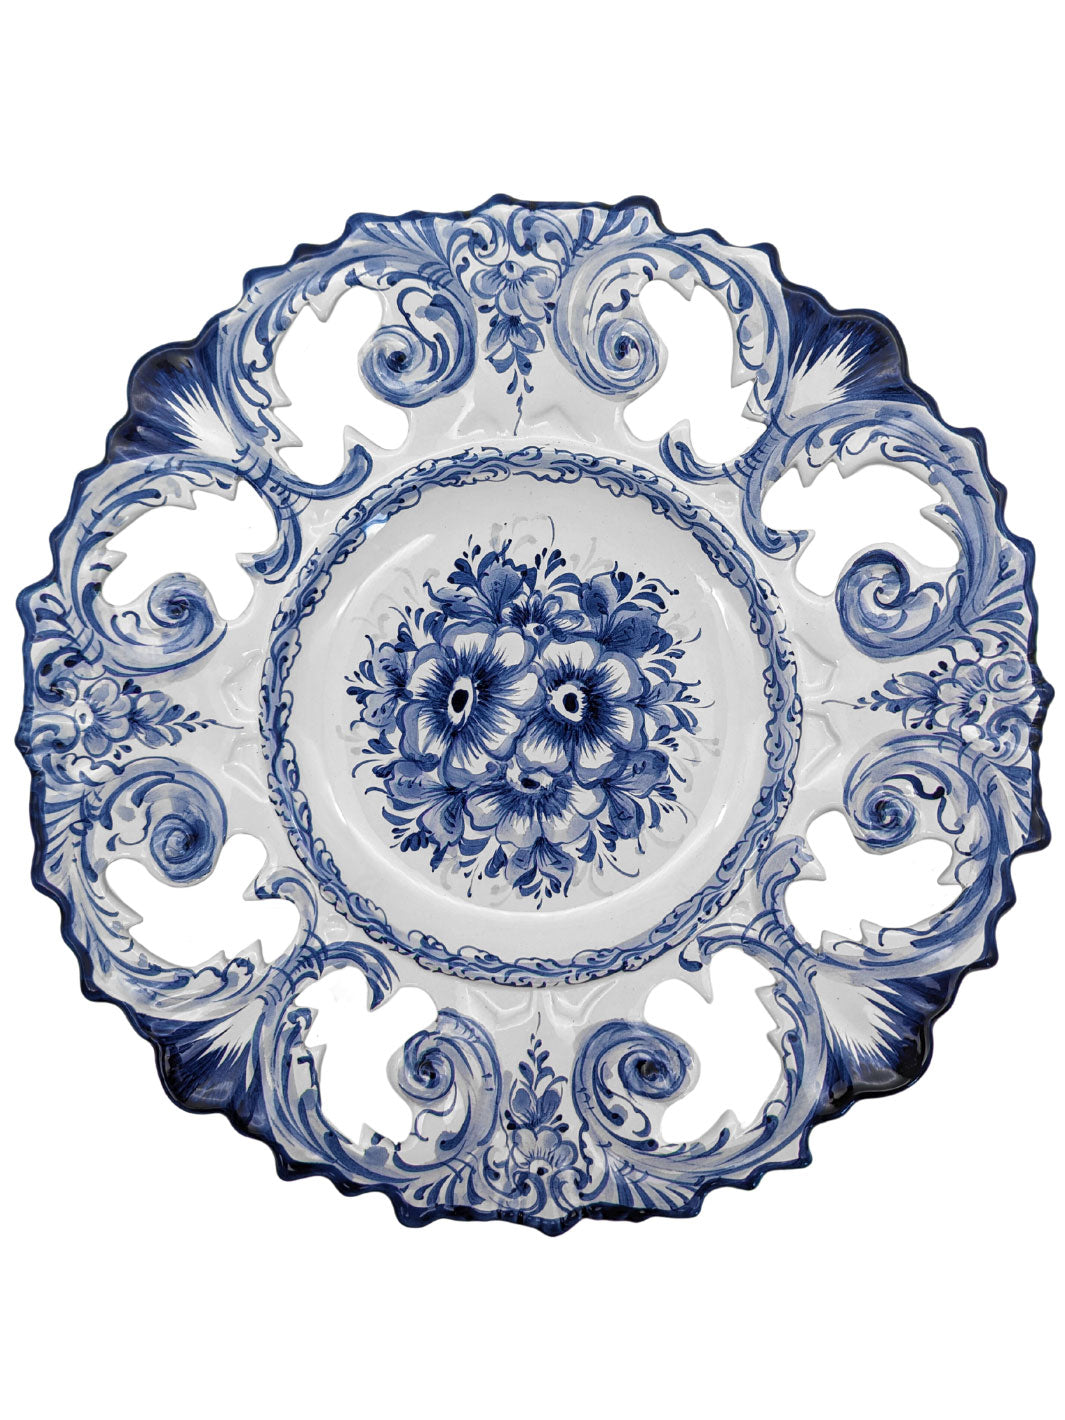 14 Inch Hand painted Blue and White Portuguese Ceramic Decorative Plate